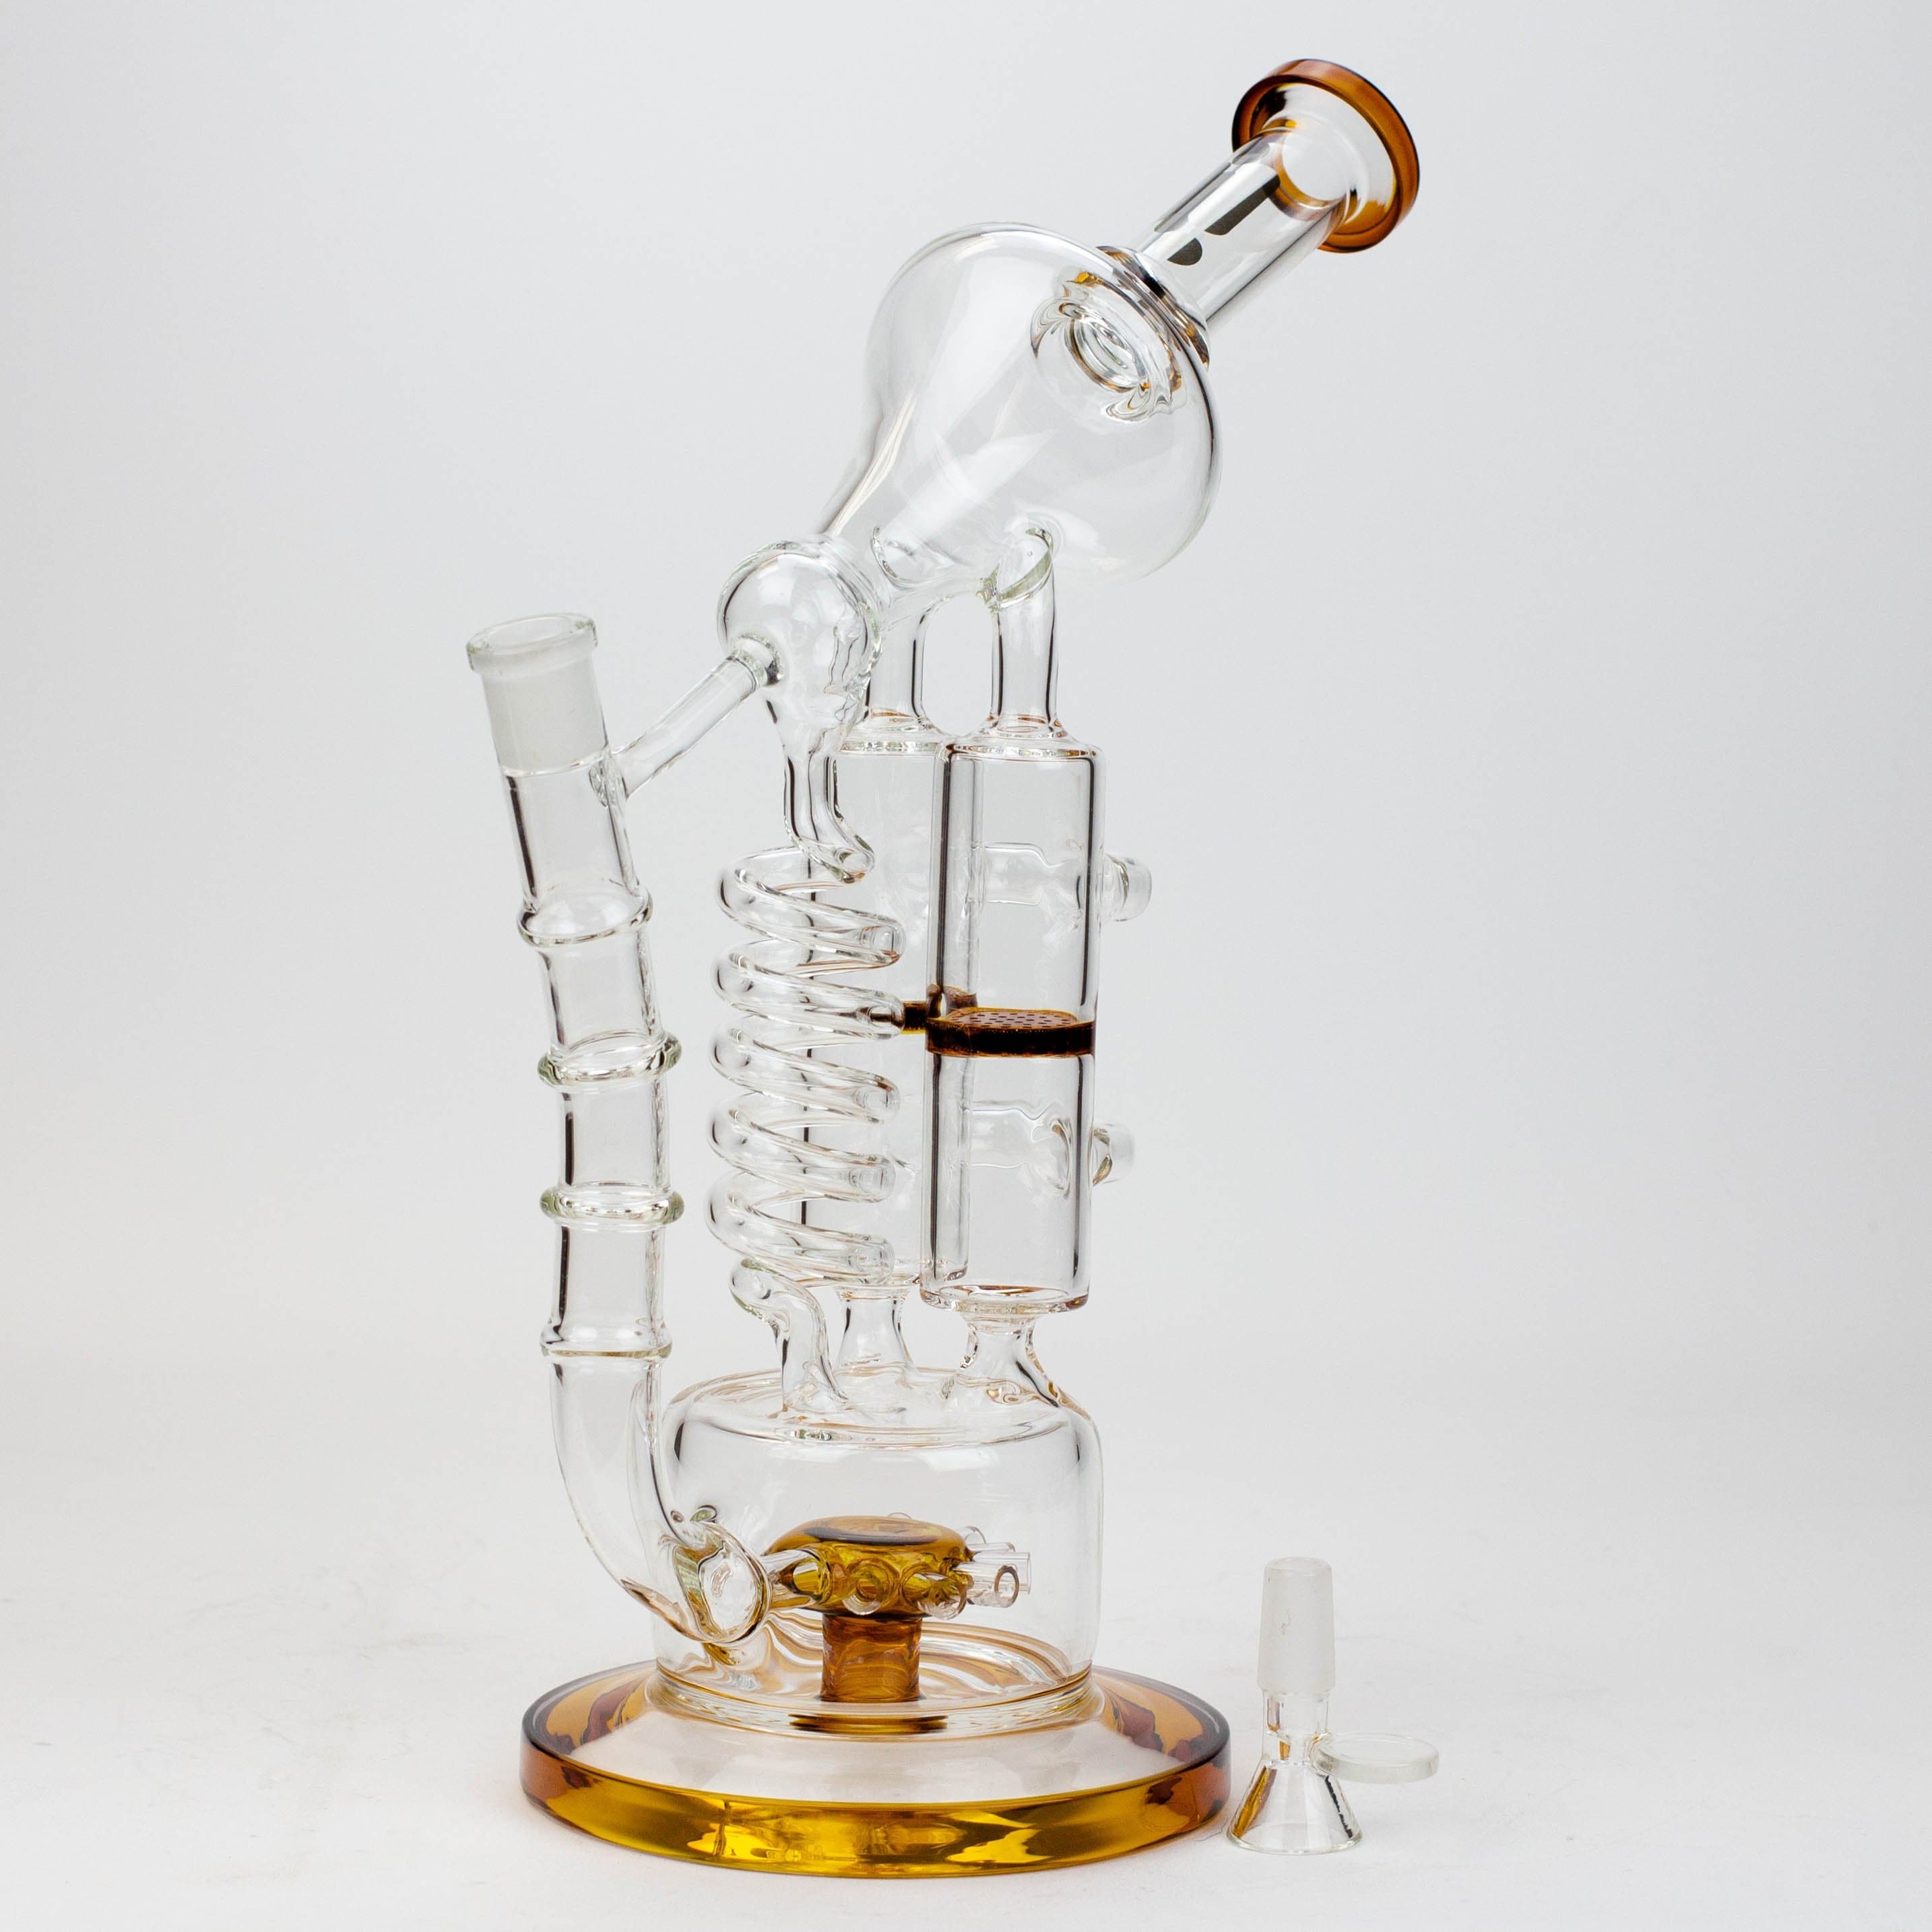 Infyniti coil, dual honeycome and flower diffuser glass recycler pipes 13"_2